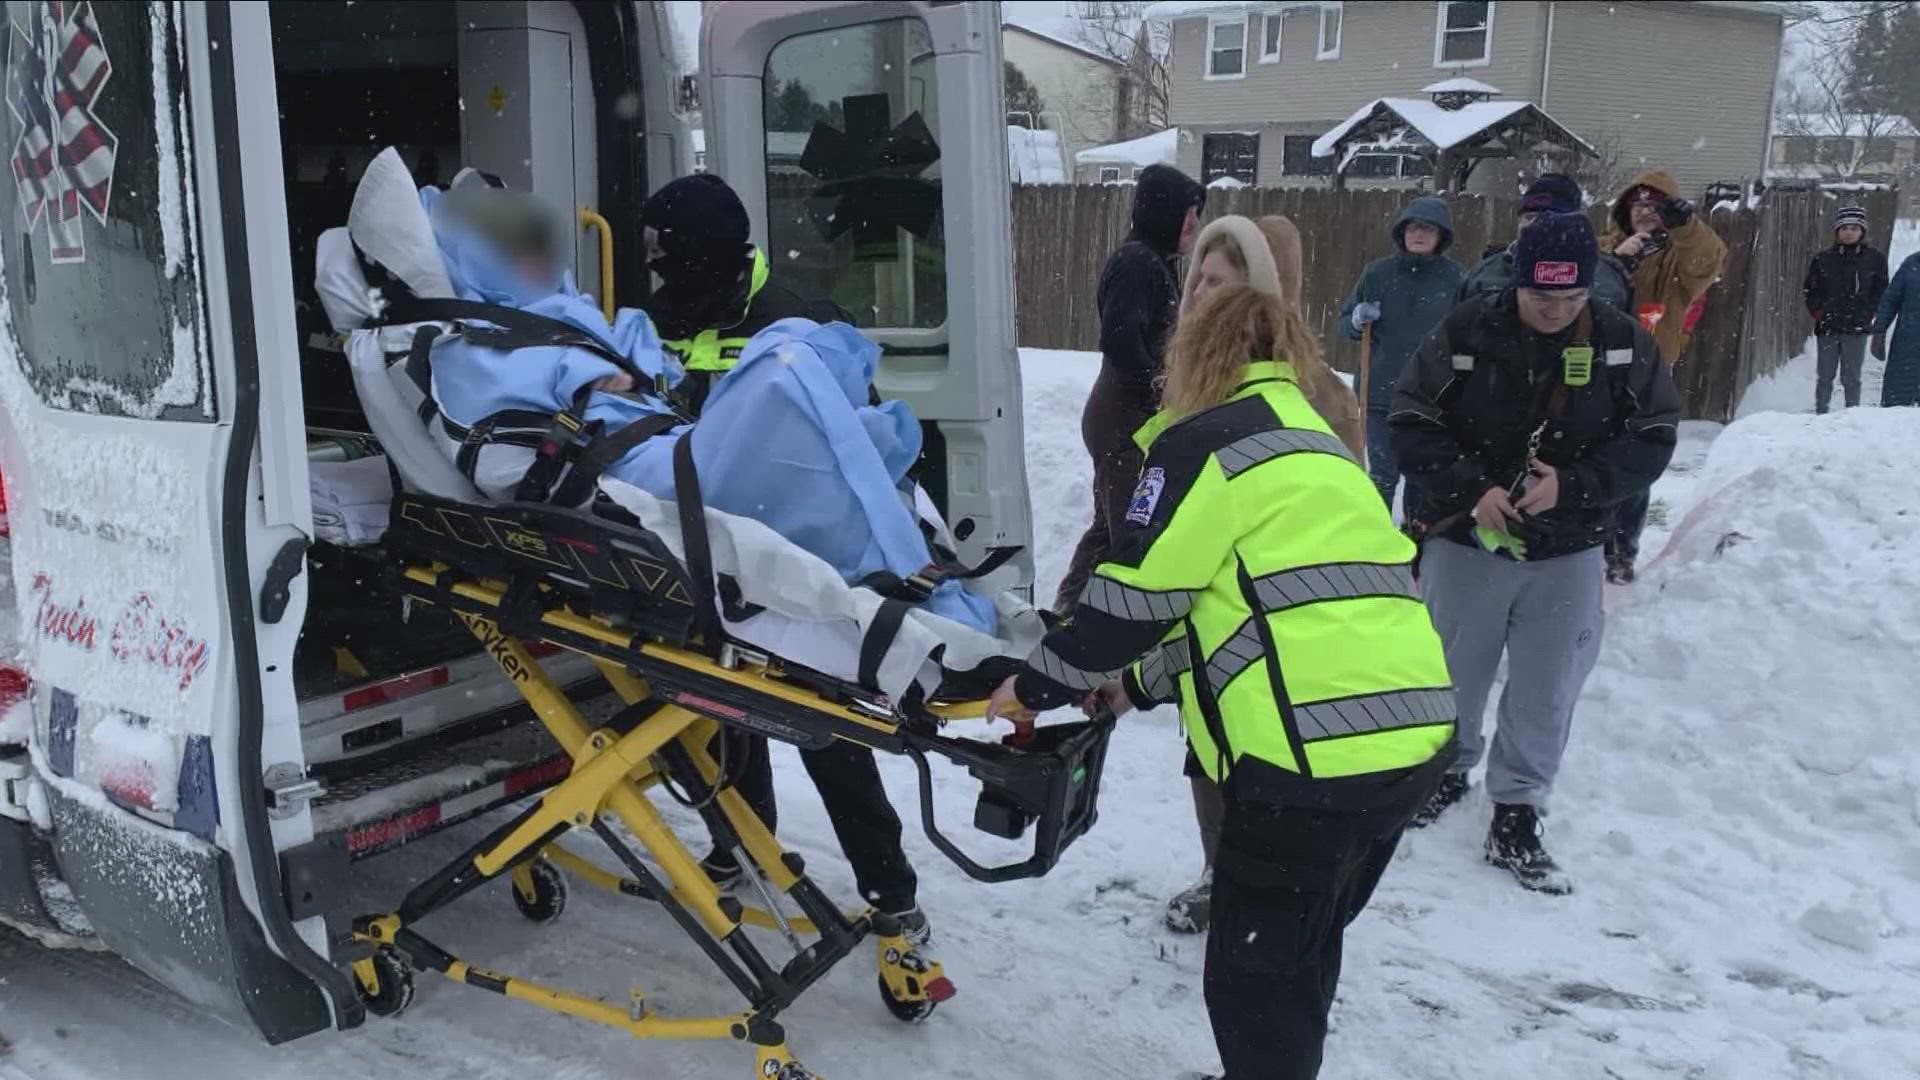 Dozens of neighbors cleared a path in the snow to help get a neighbor, suffering a medical emergency, to a waiting ambulance.